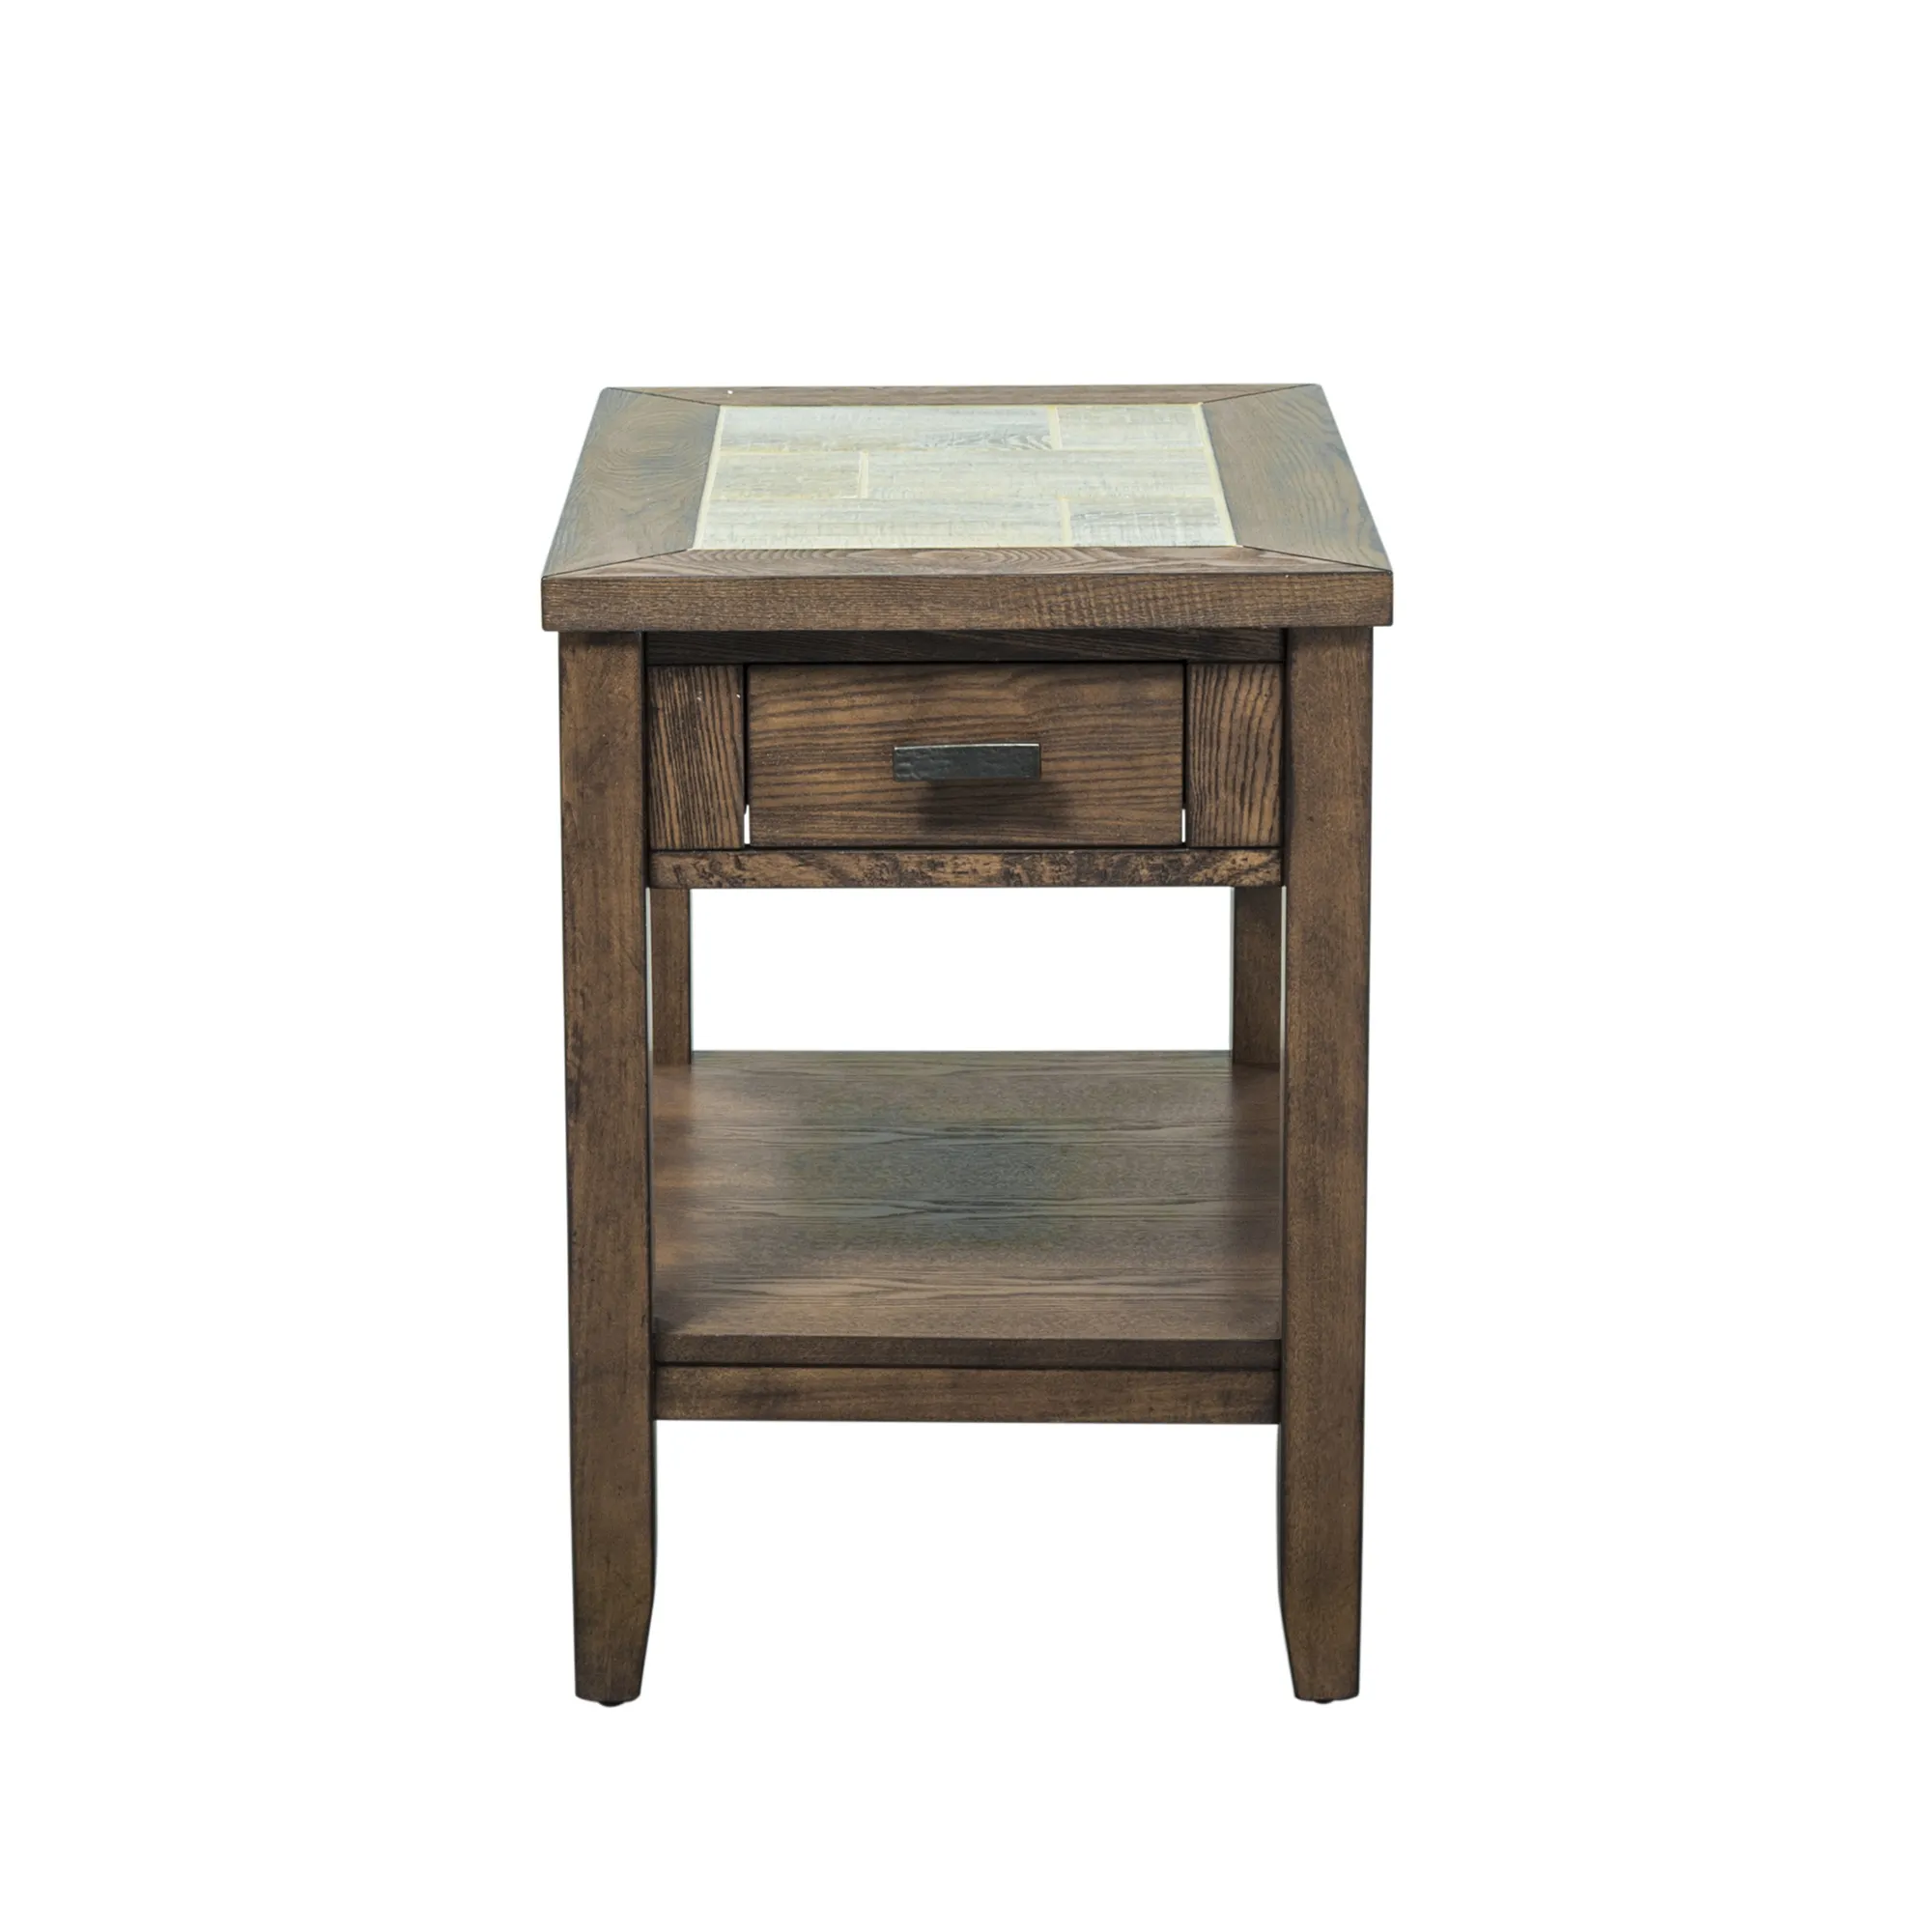 CHAIR SIDE TABLE - MESA VALLEY